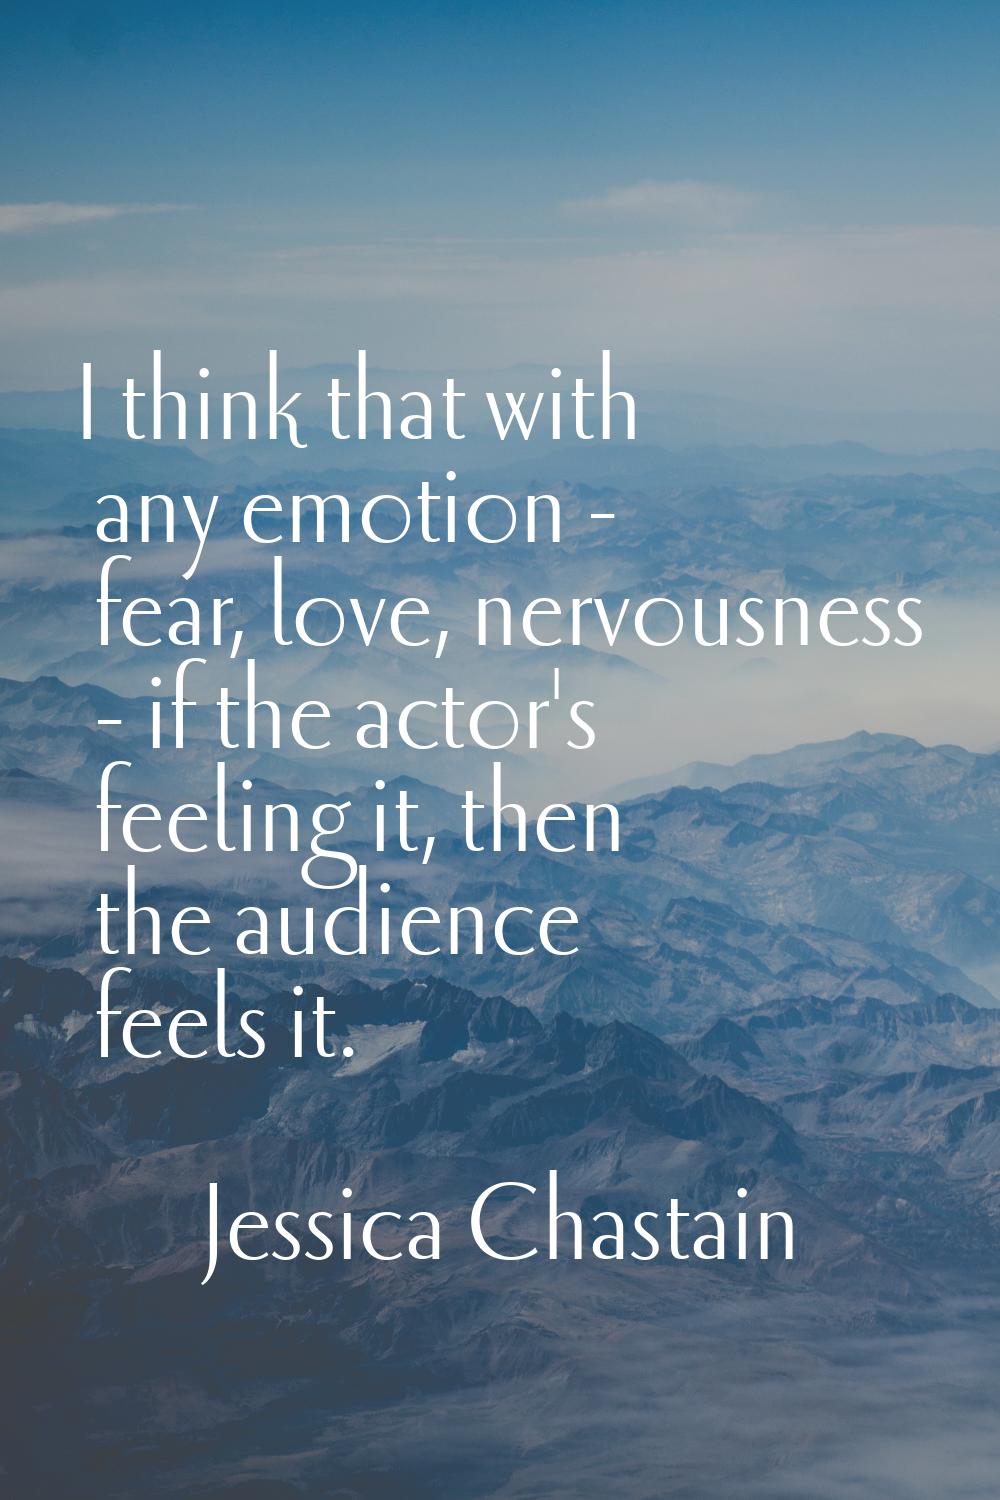 I think that with any emotion - fear, love, nervousness - if the actor's feeling it, then the audie